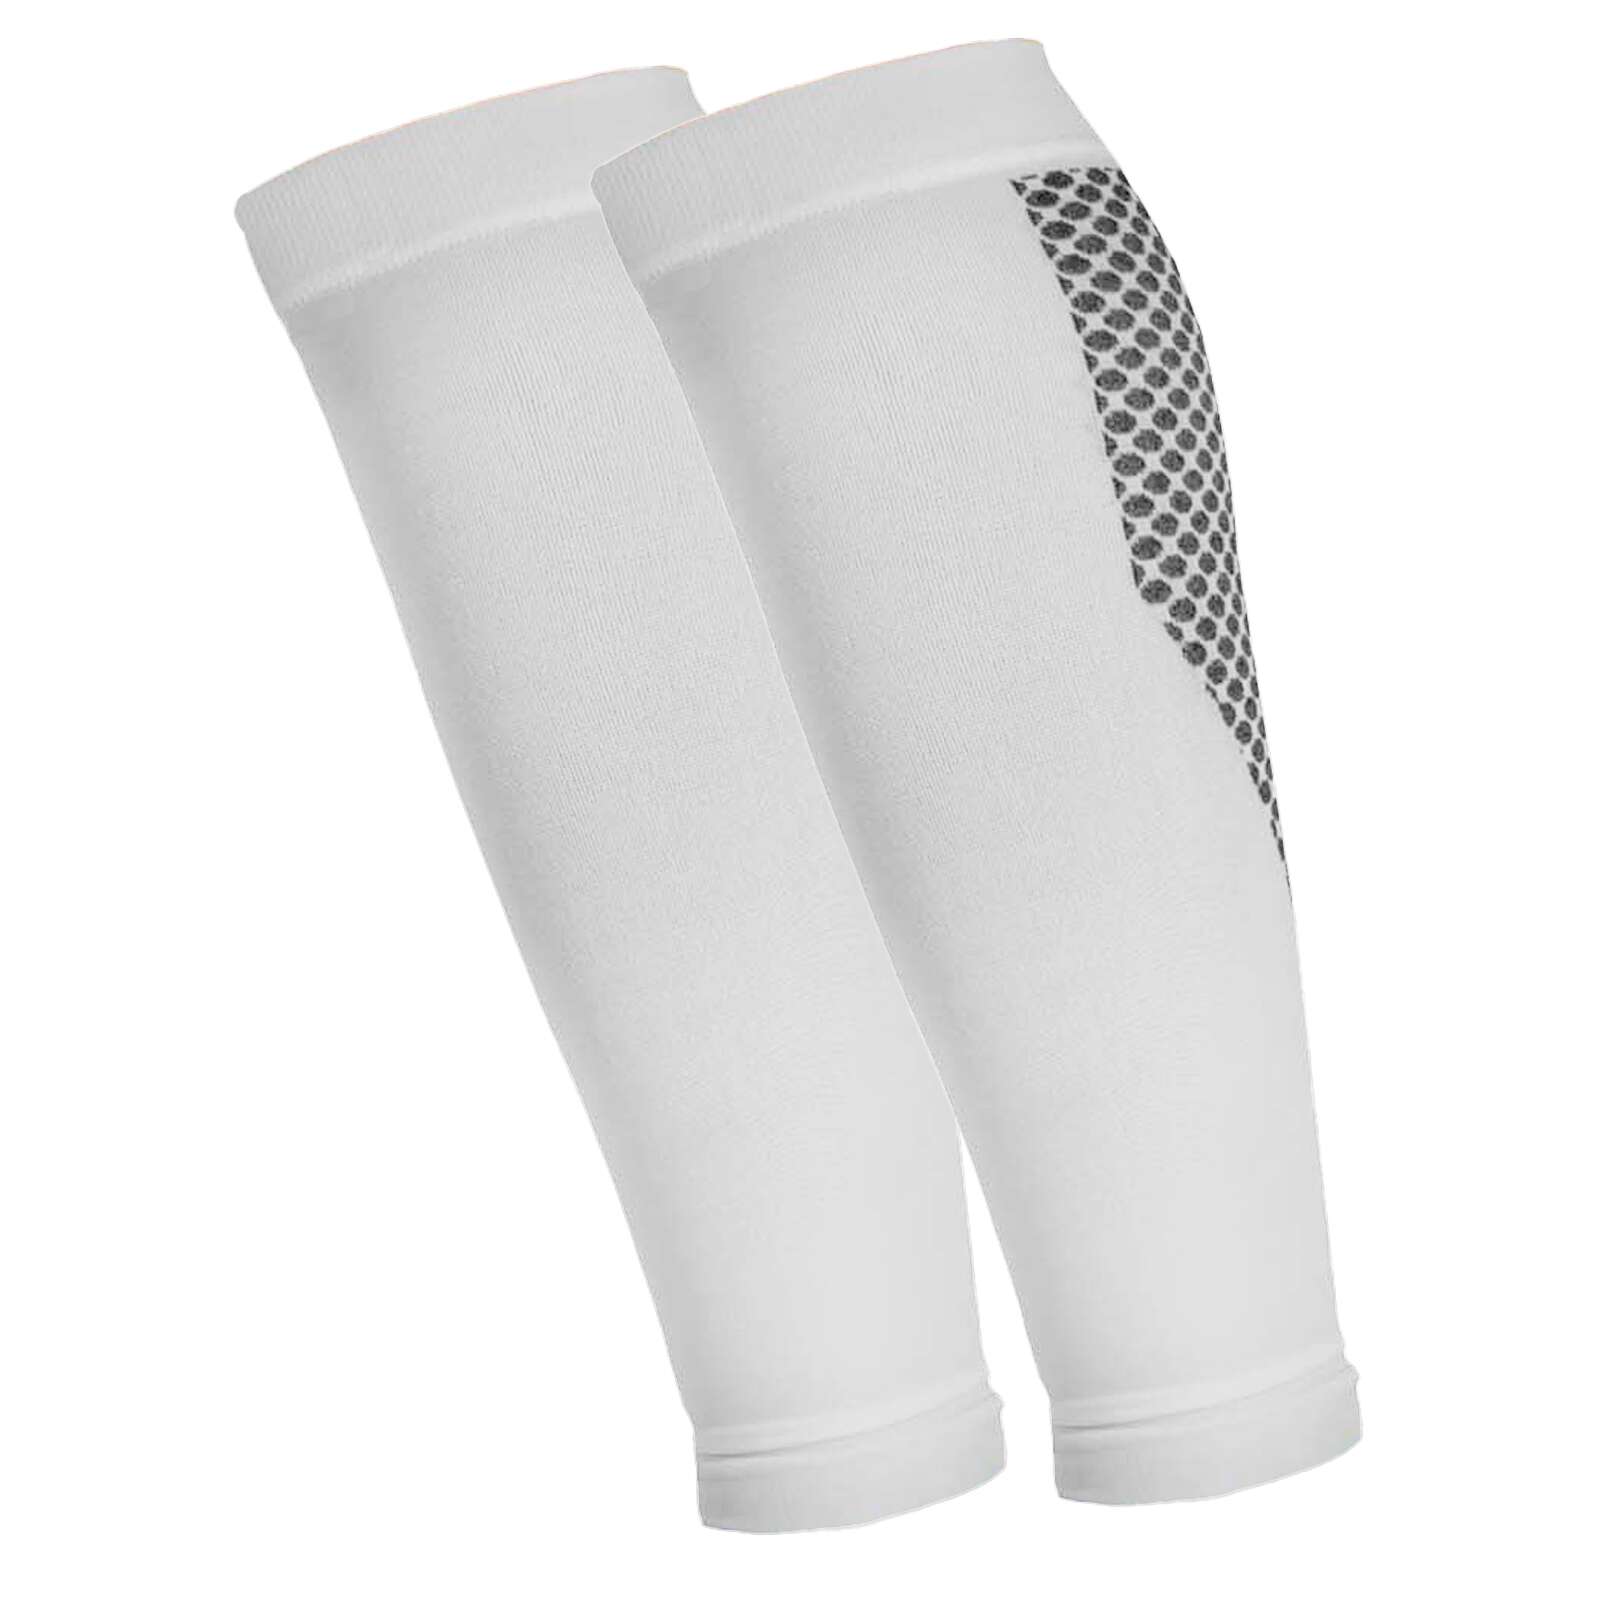 compression leg sleeves for varicose veins, compression leg sleeves for varicose  veins Suppliers and Manufacturers at